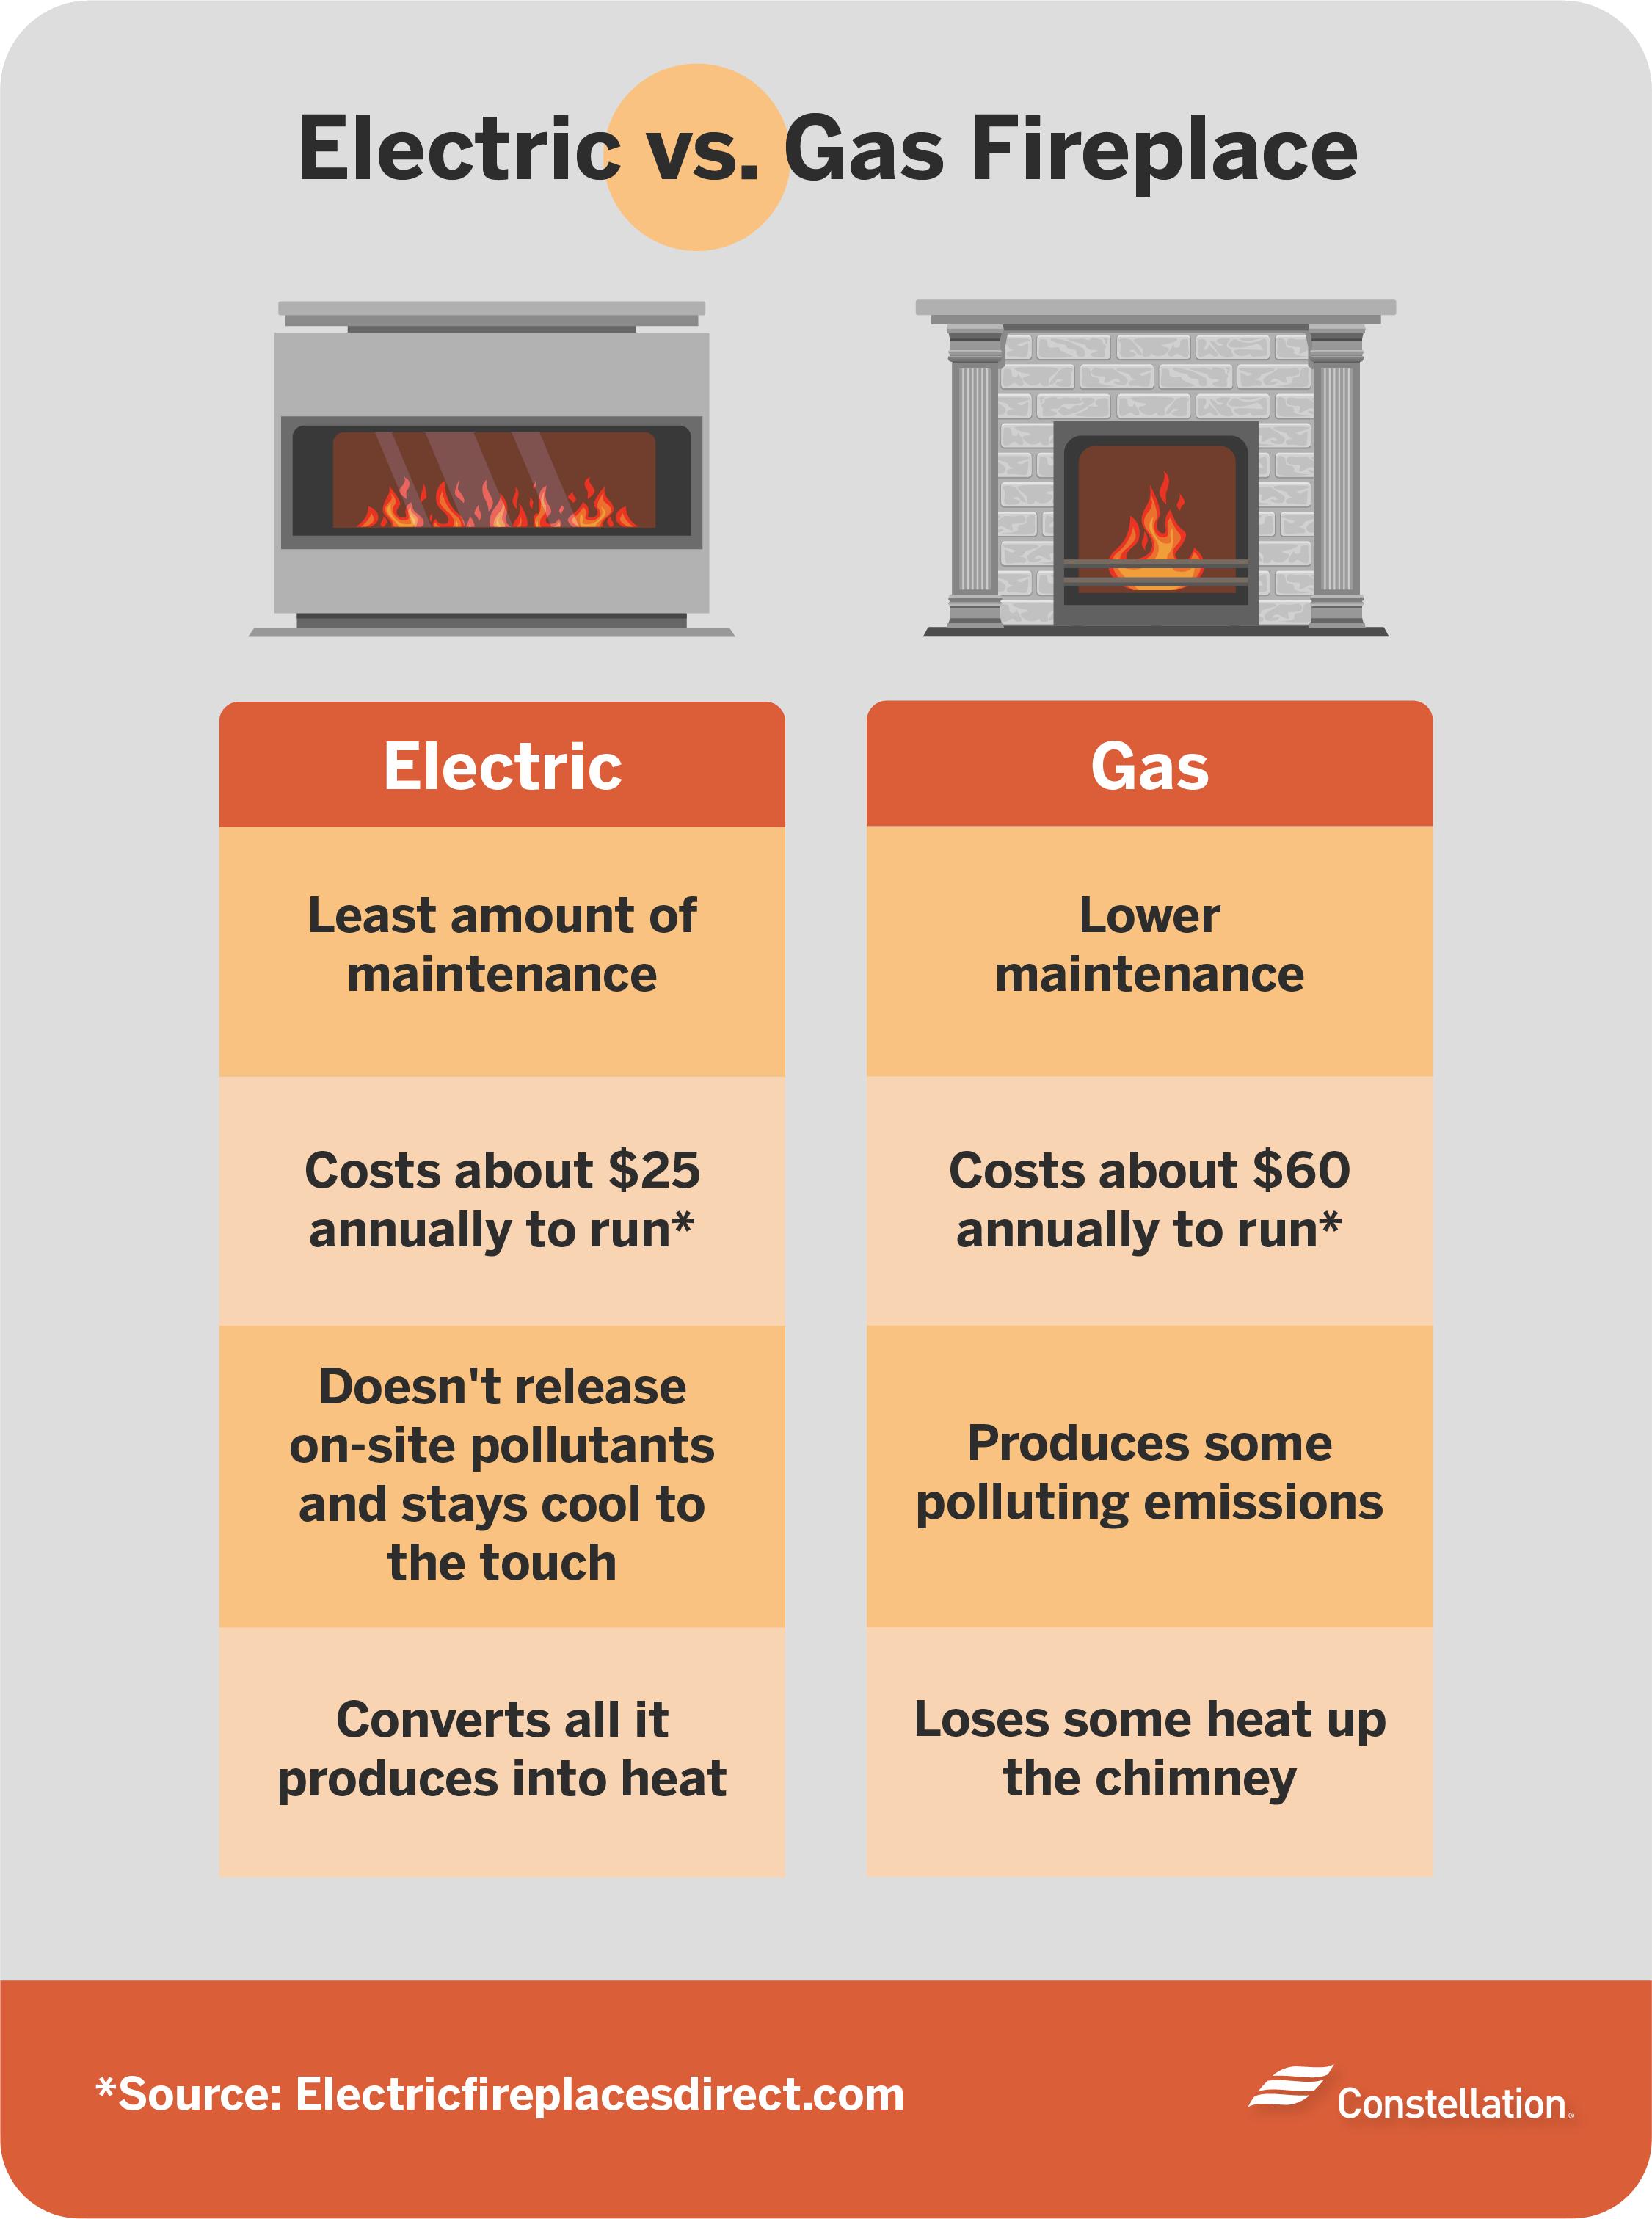 All About Gas Fireplaces: Types, Costs, and Installation - This